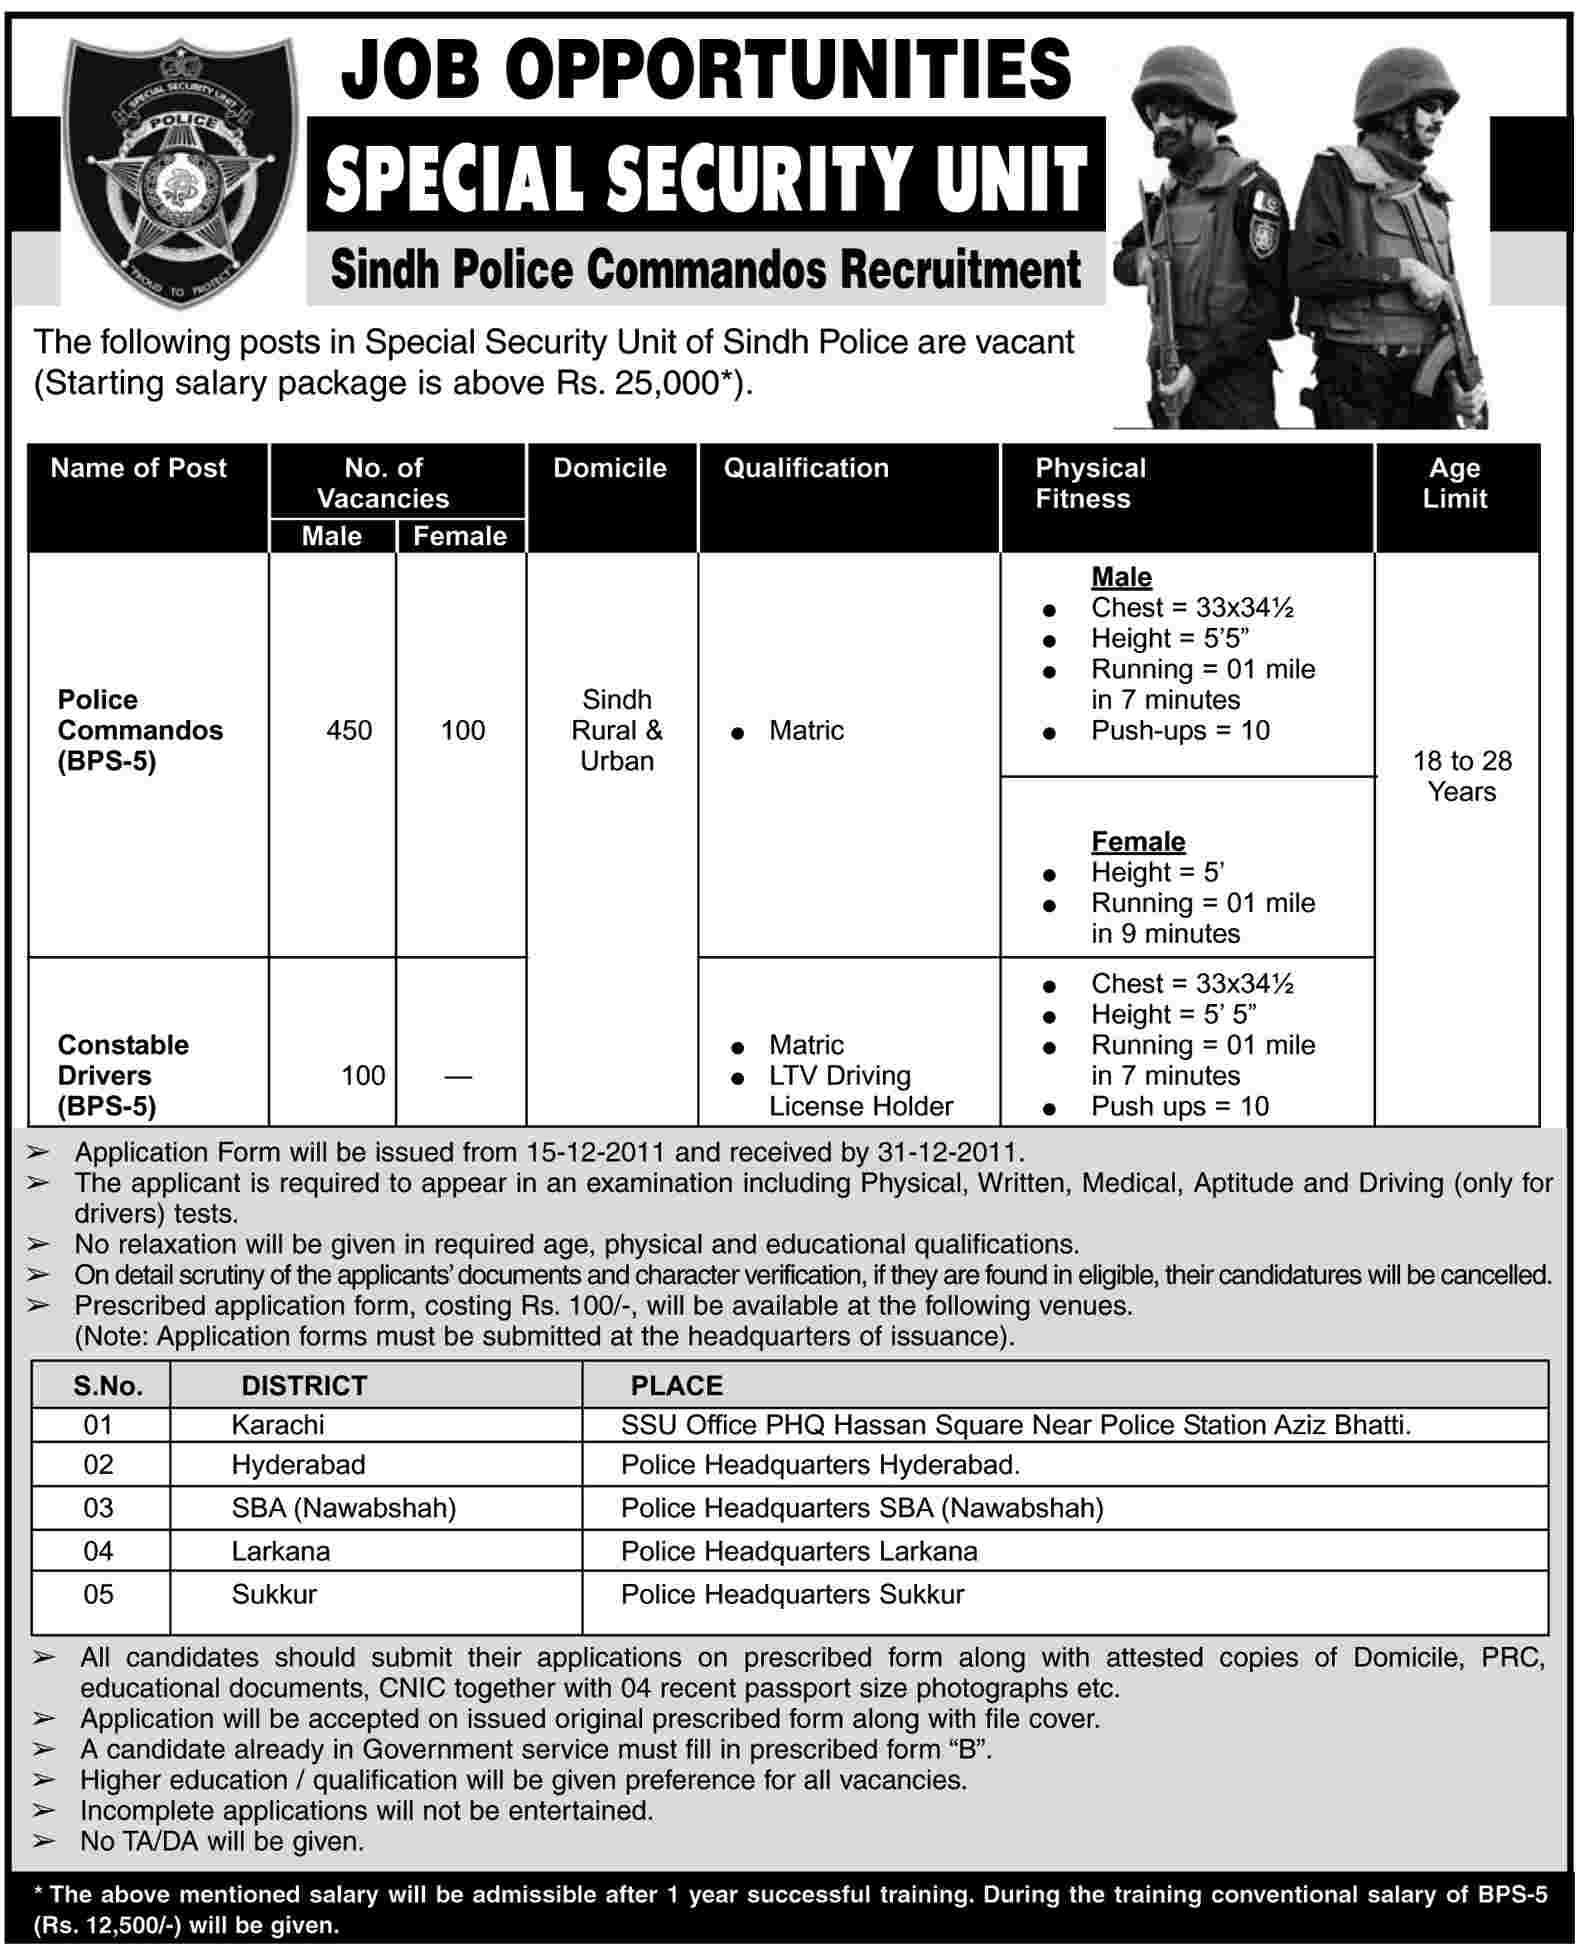 Special Security Unit, Sindh Police Commandos Jobs Opportunities